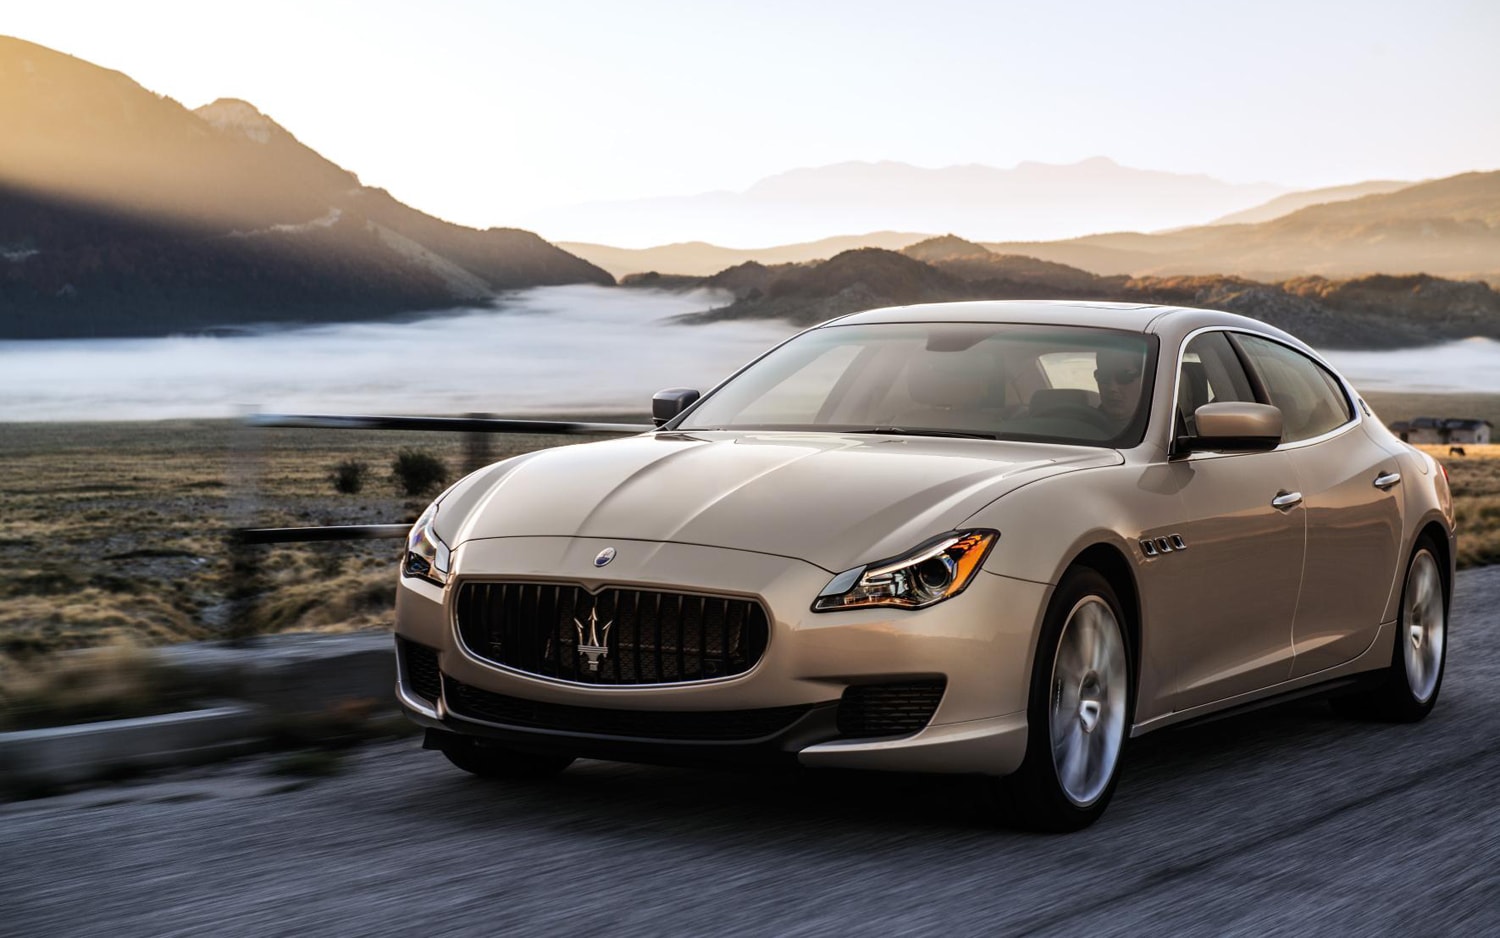 Photos: More 2013 Maserati Quattroporte Images Released Ahead of MT First  Drive